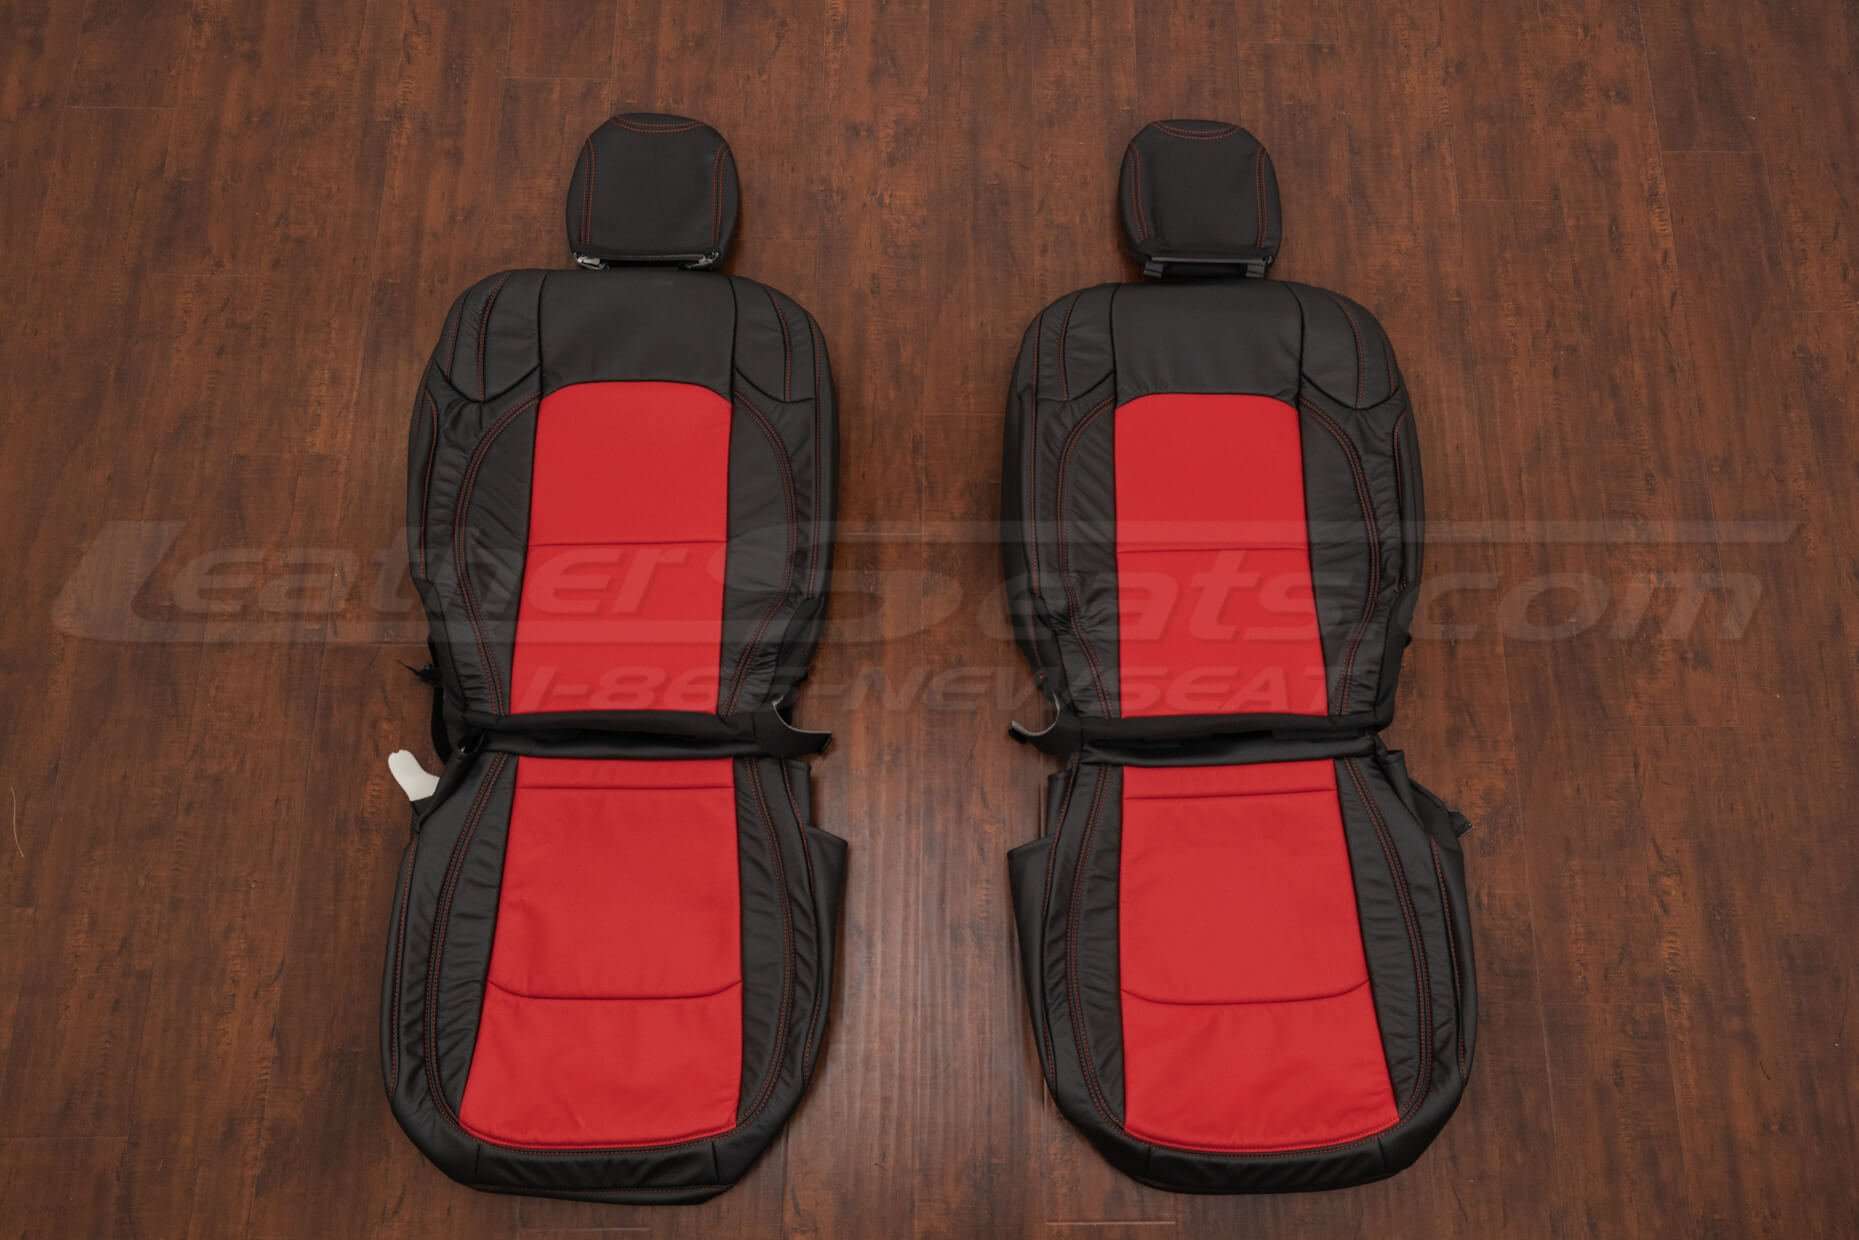 Jeep Wrangler Leather Kit - Black & Bright red - Front seat upholstery